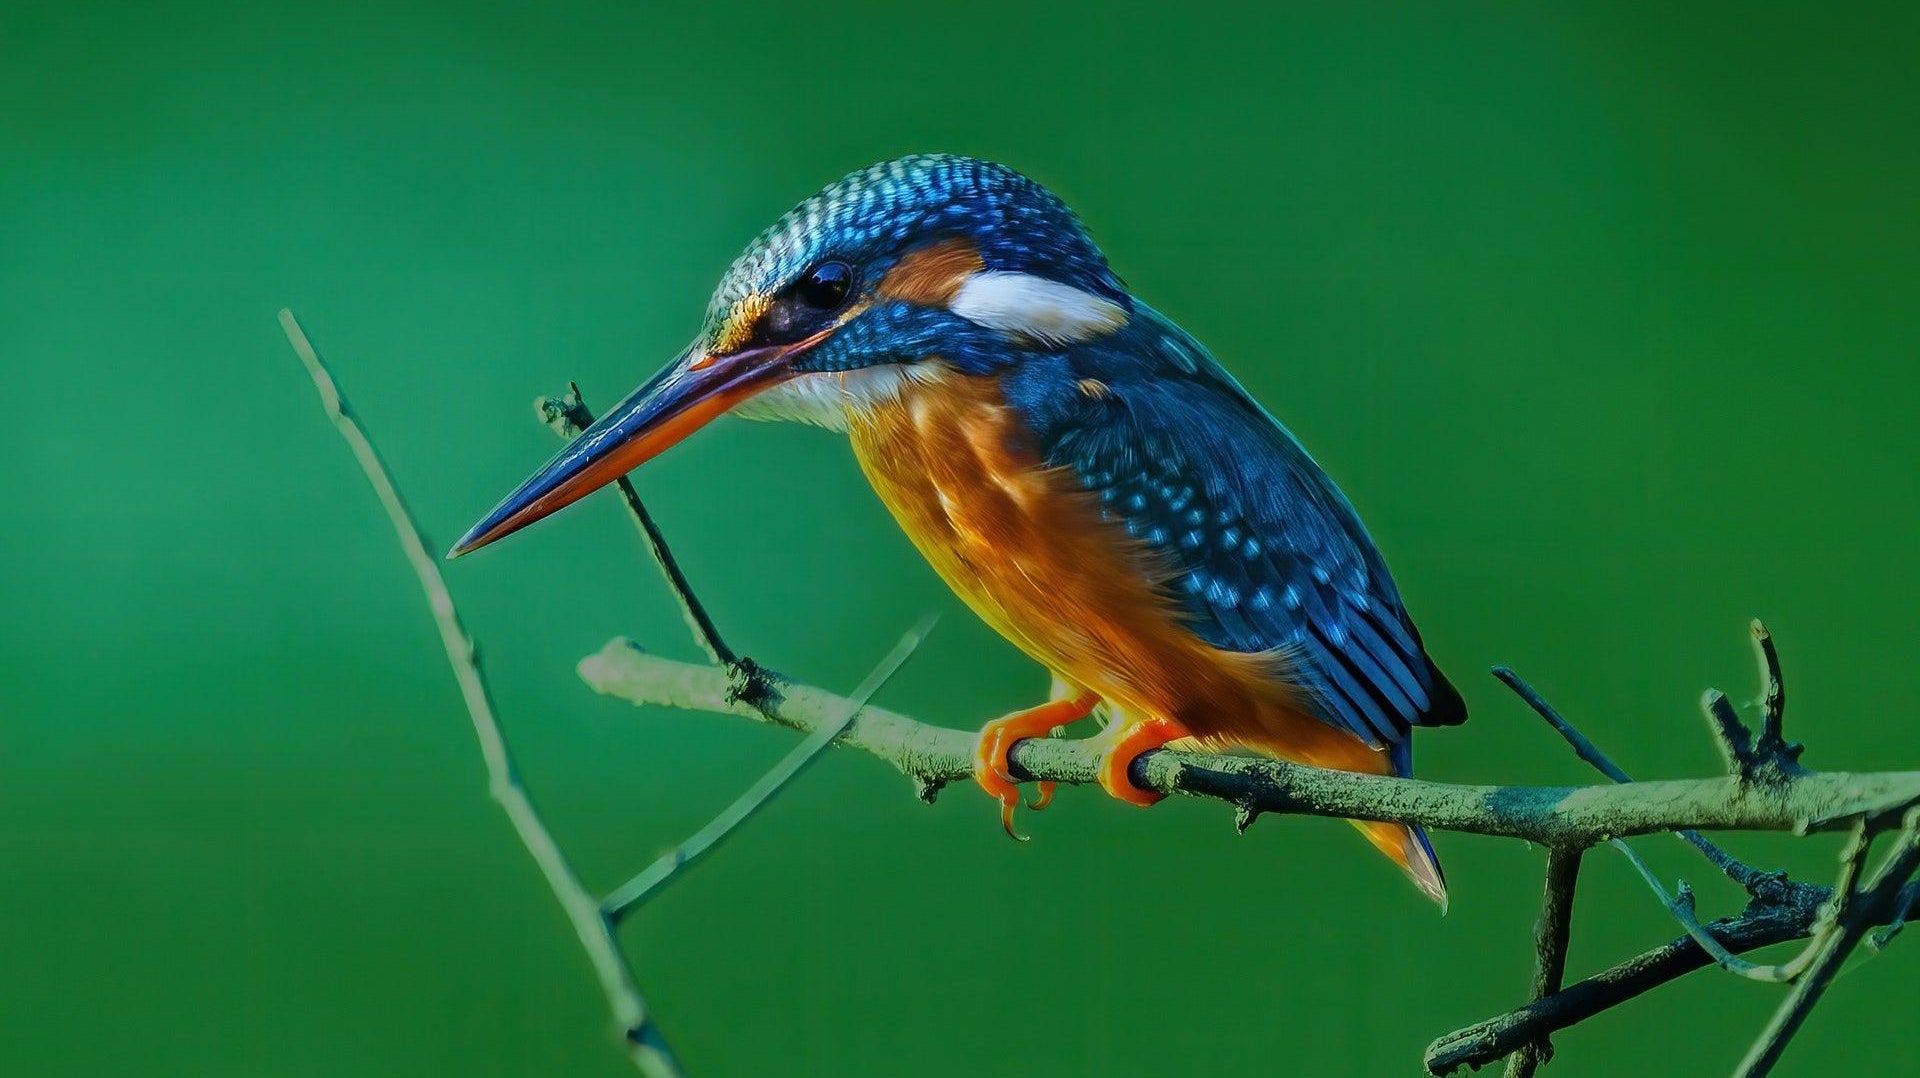 Kingfisher close up by Sachin Nihcas | Pexels